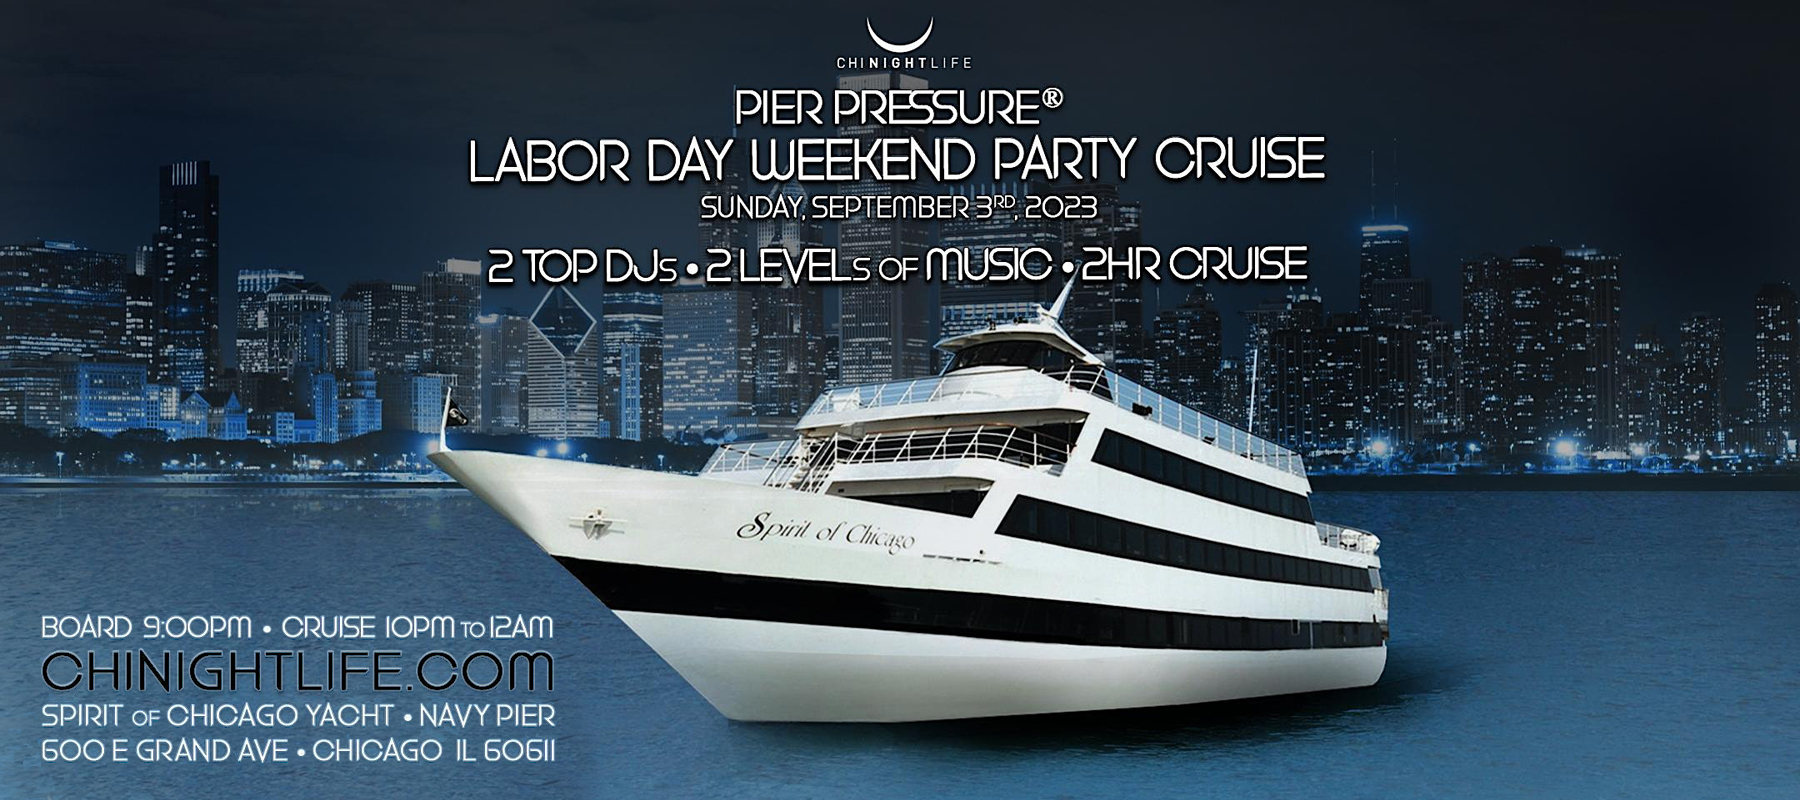 chicago-labor-day-weekend-pier-pressure-yacht-party-cruise-1800×800